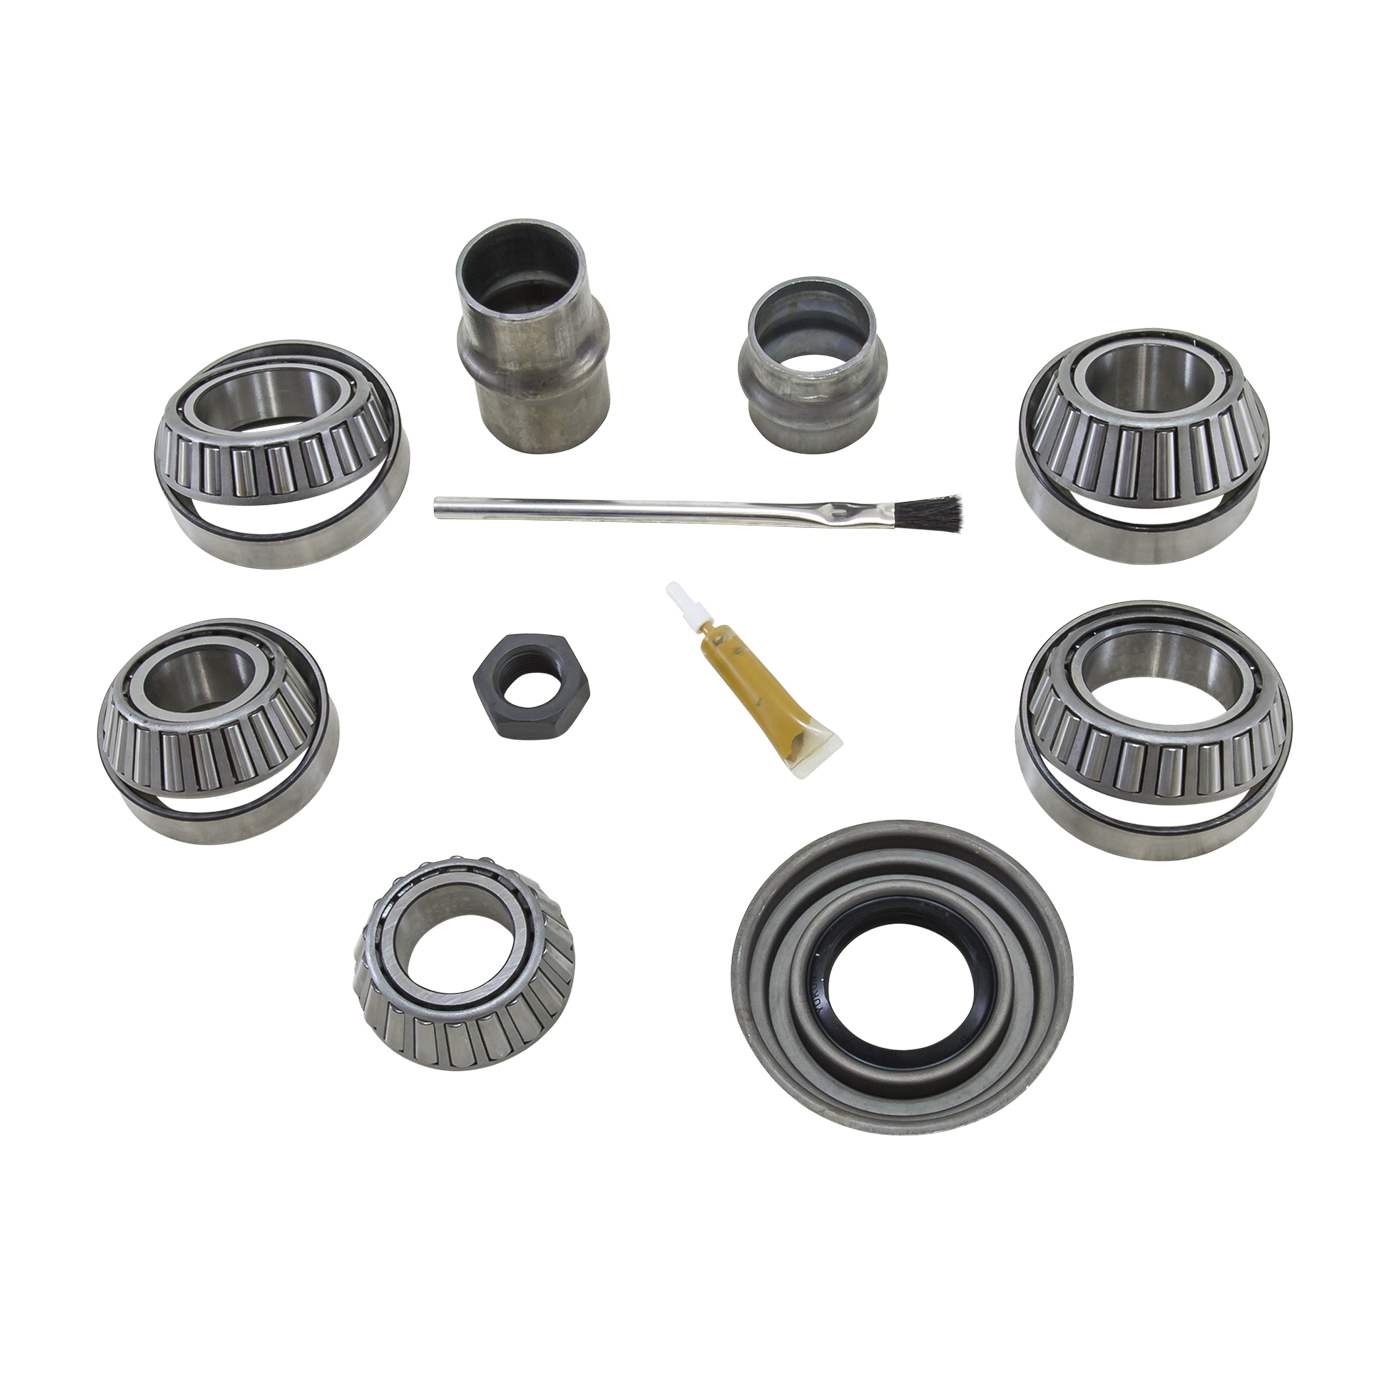 Front Bearing Installation Kit For Dana 28 Differential Includes: